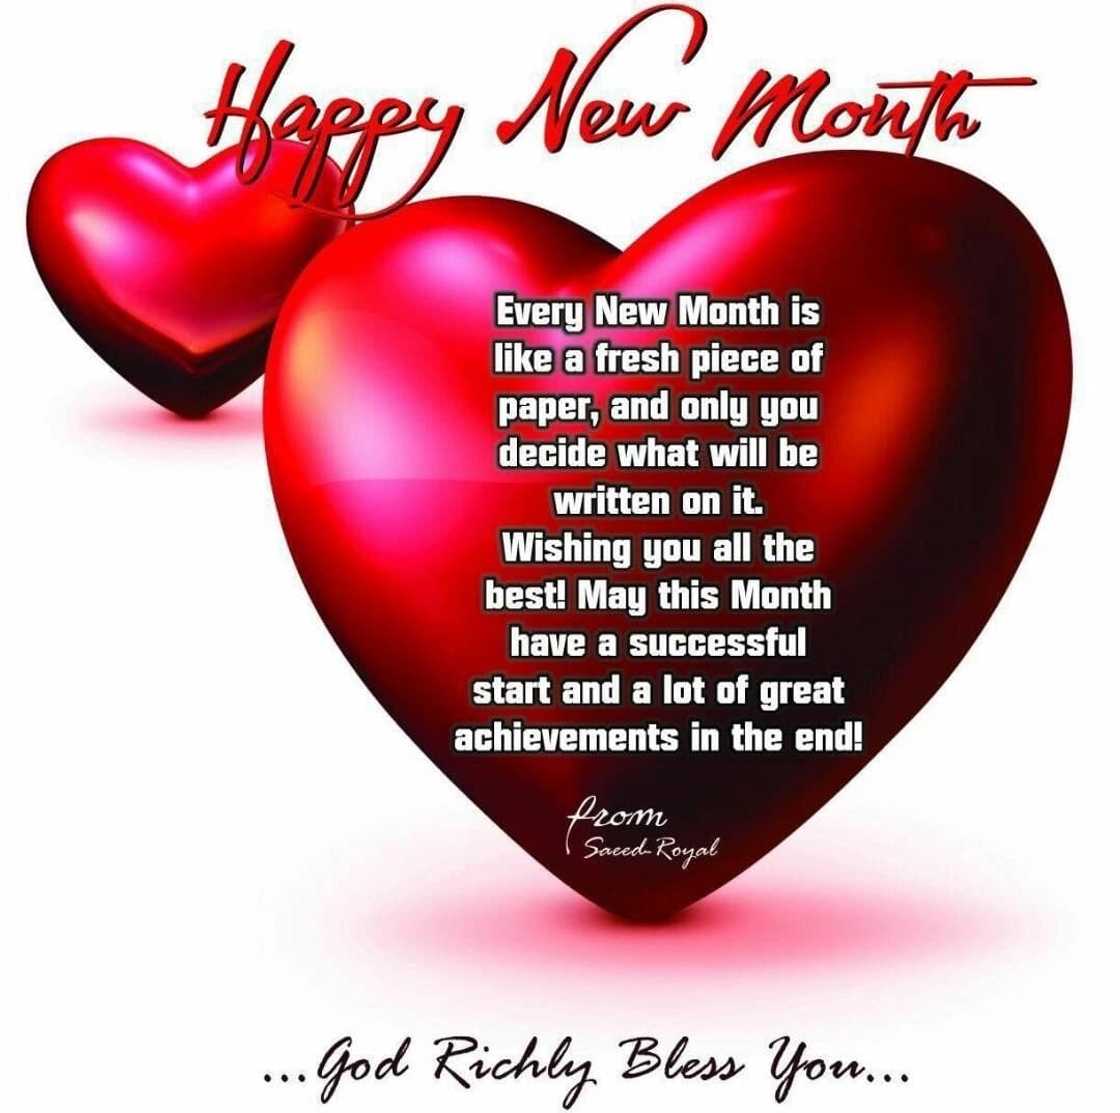 new month quotes
happy new month prayers
happy month end